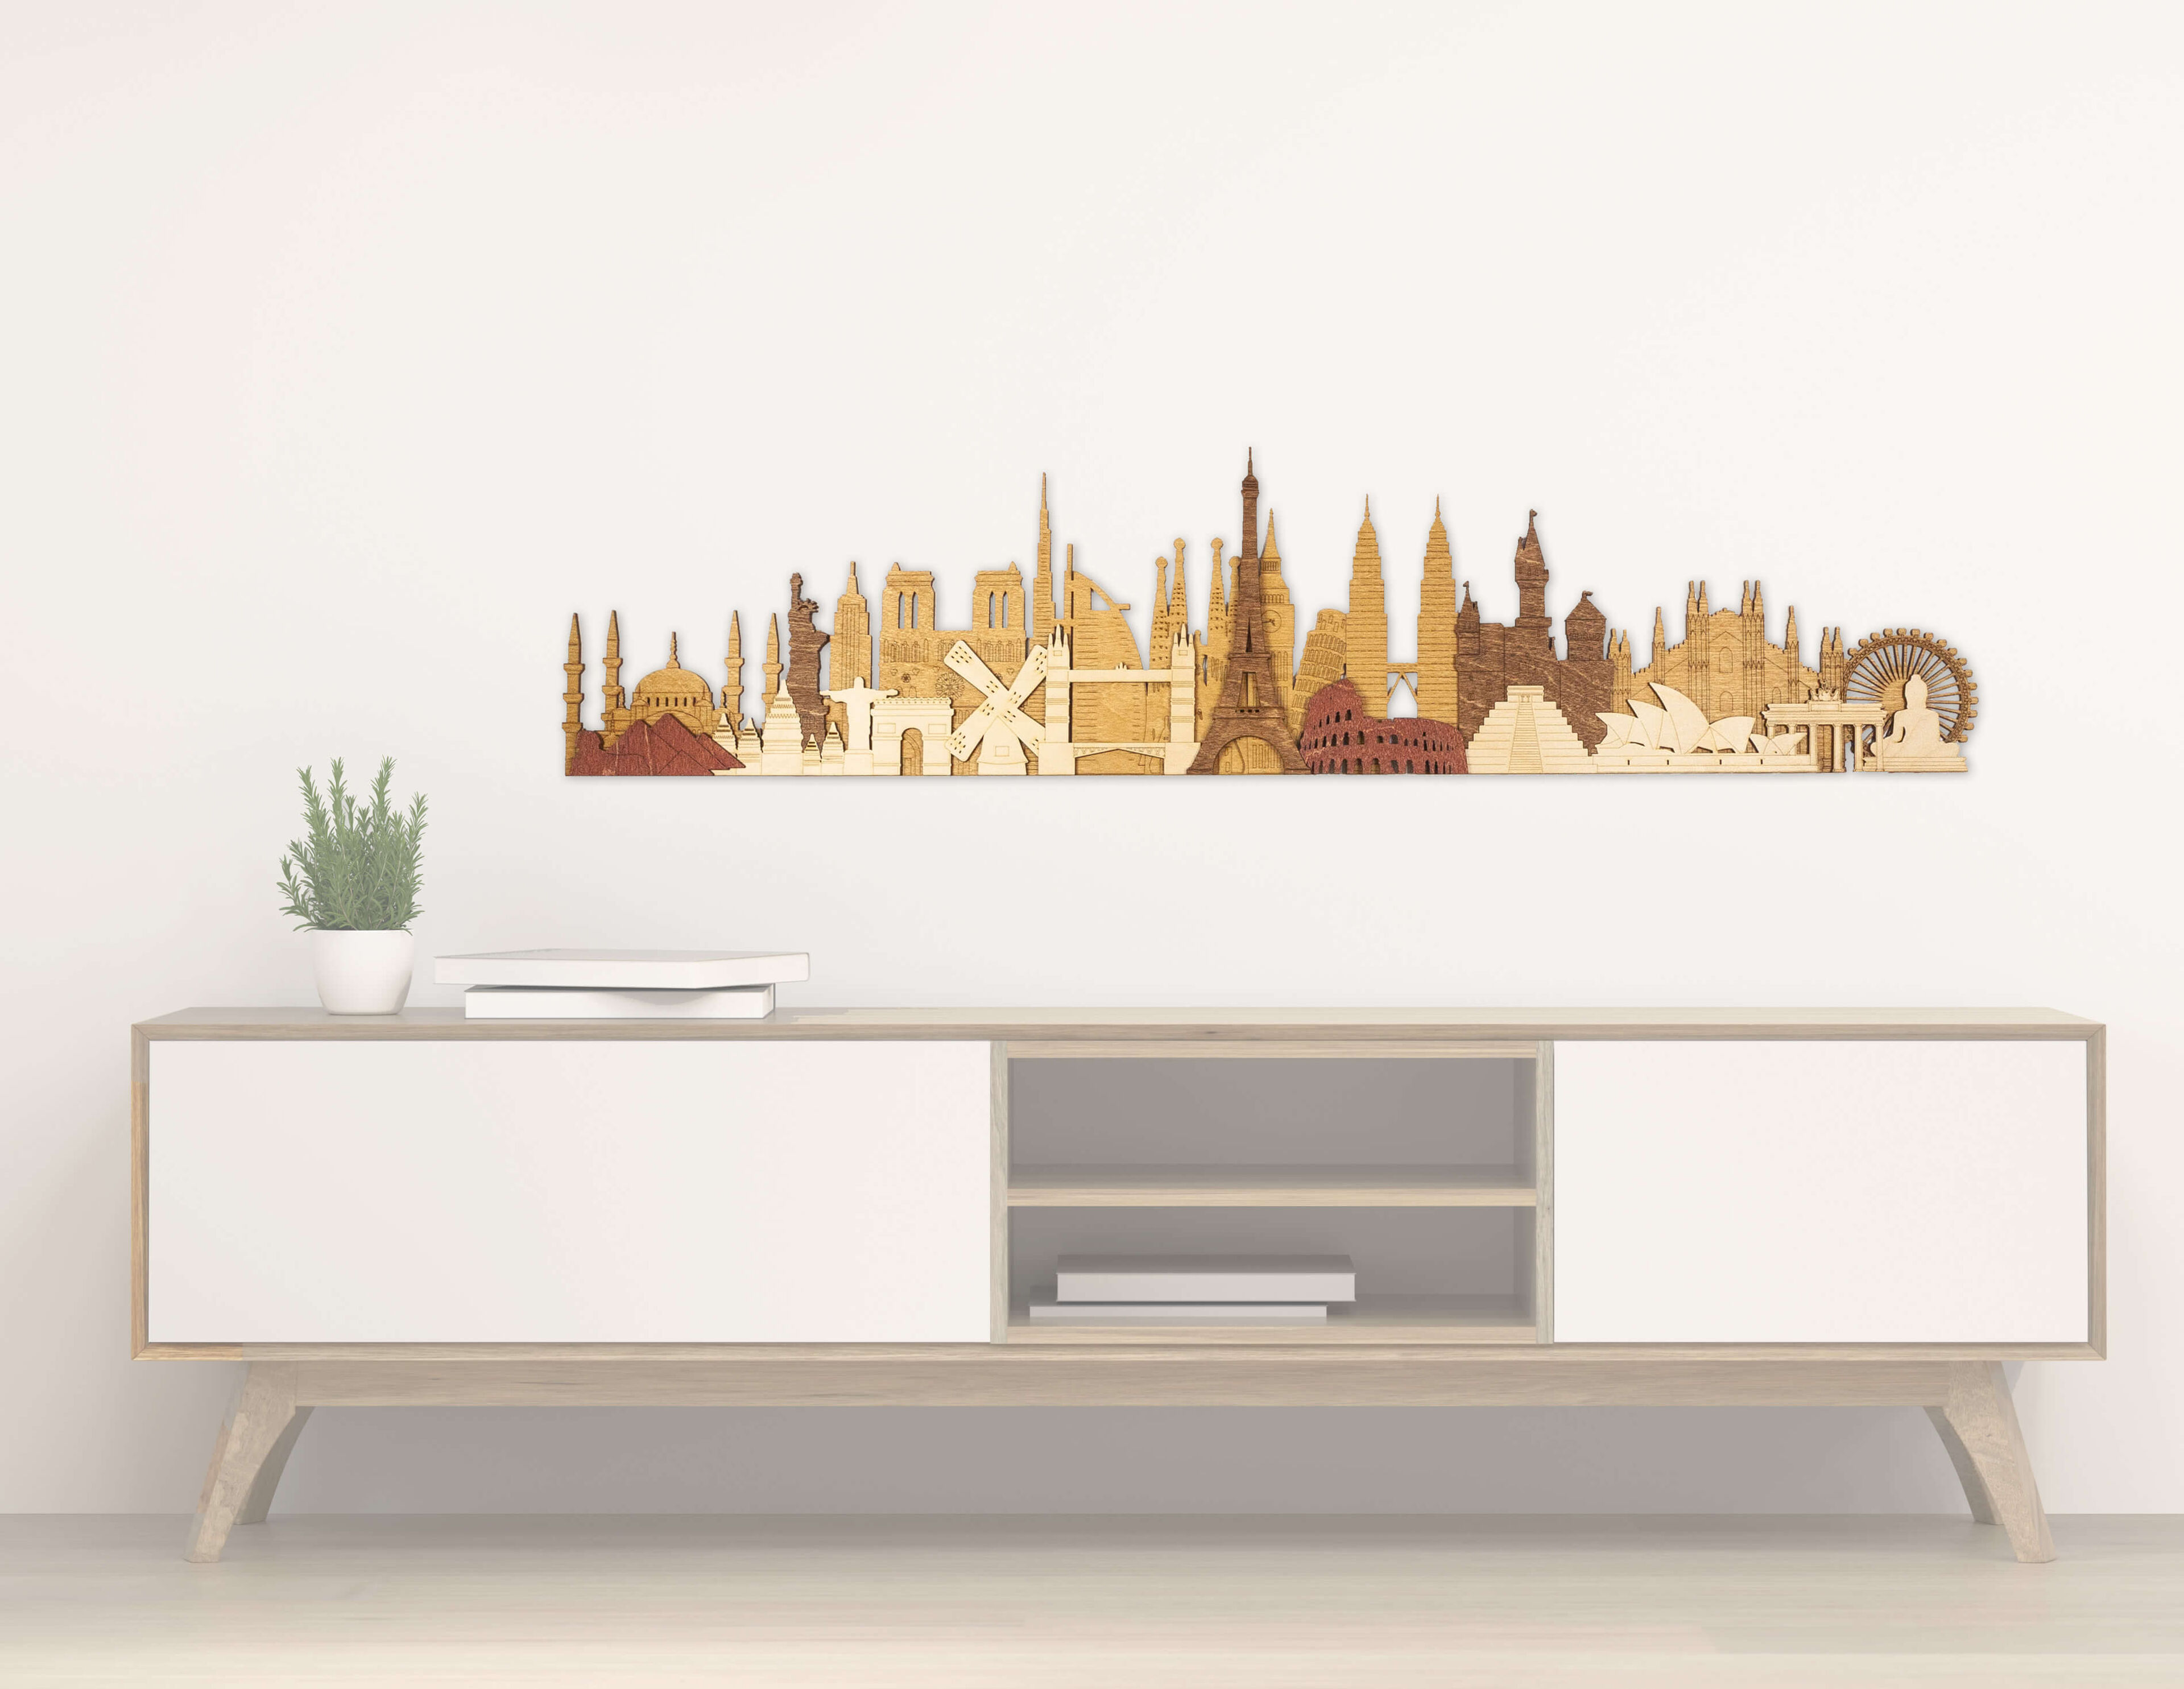 World Monuments and Attractions 3D Wooden Panel